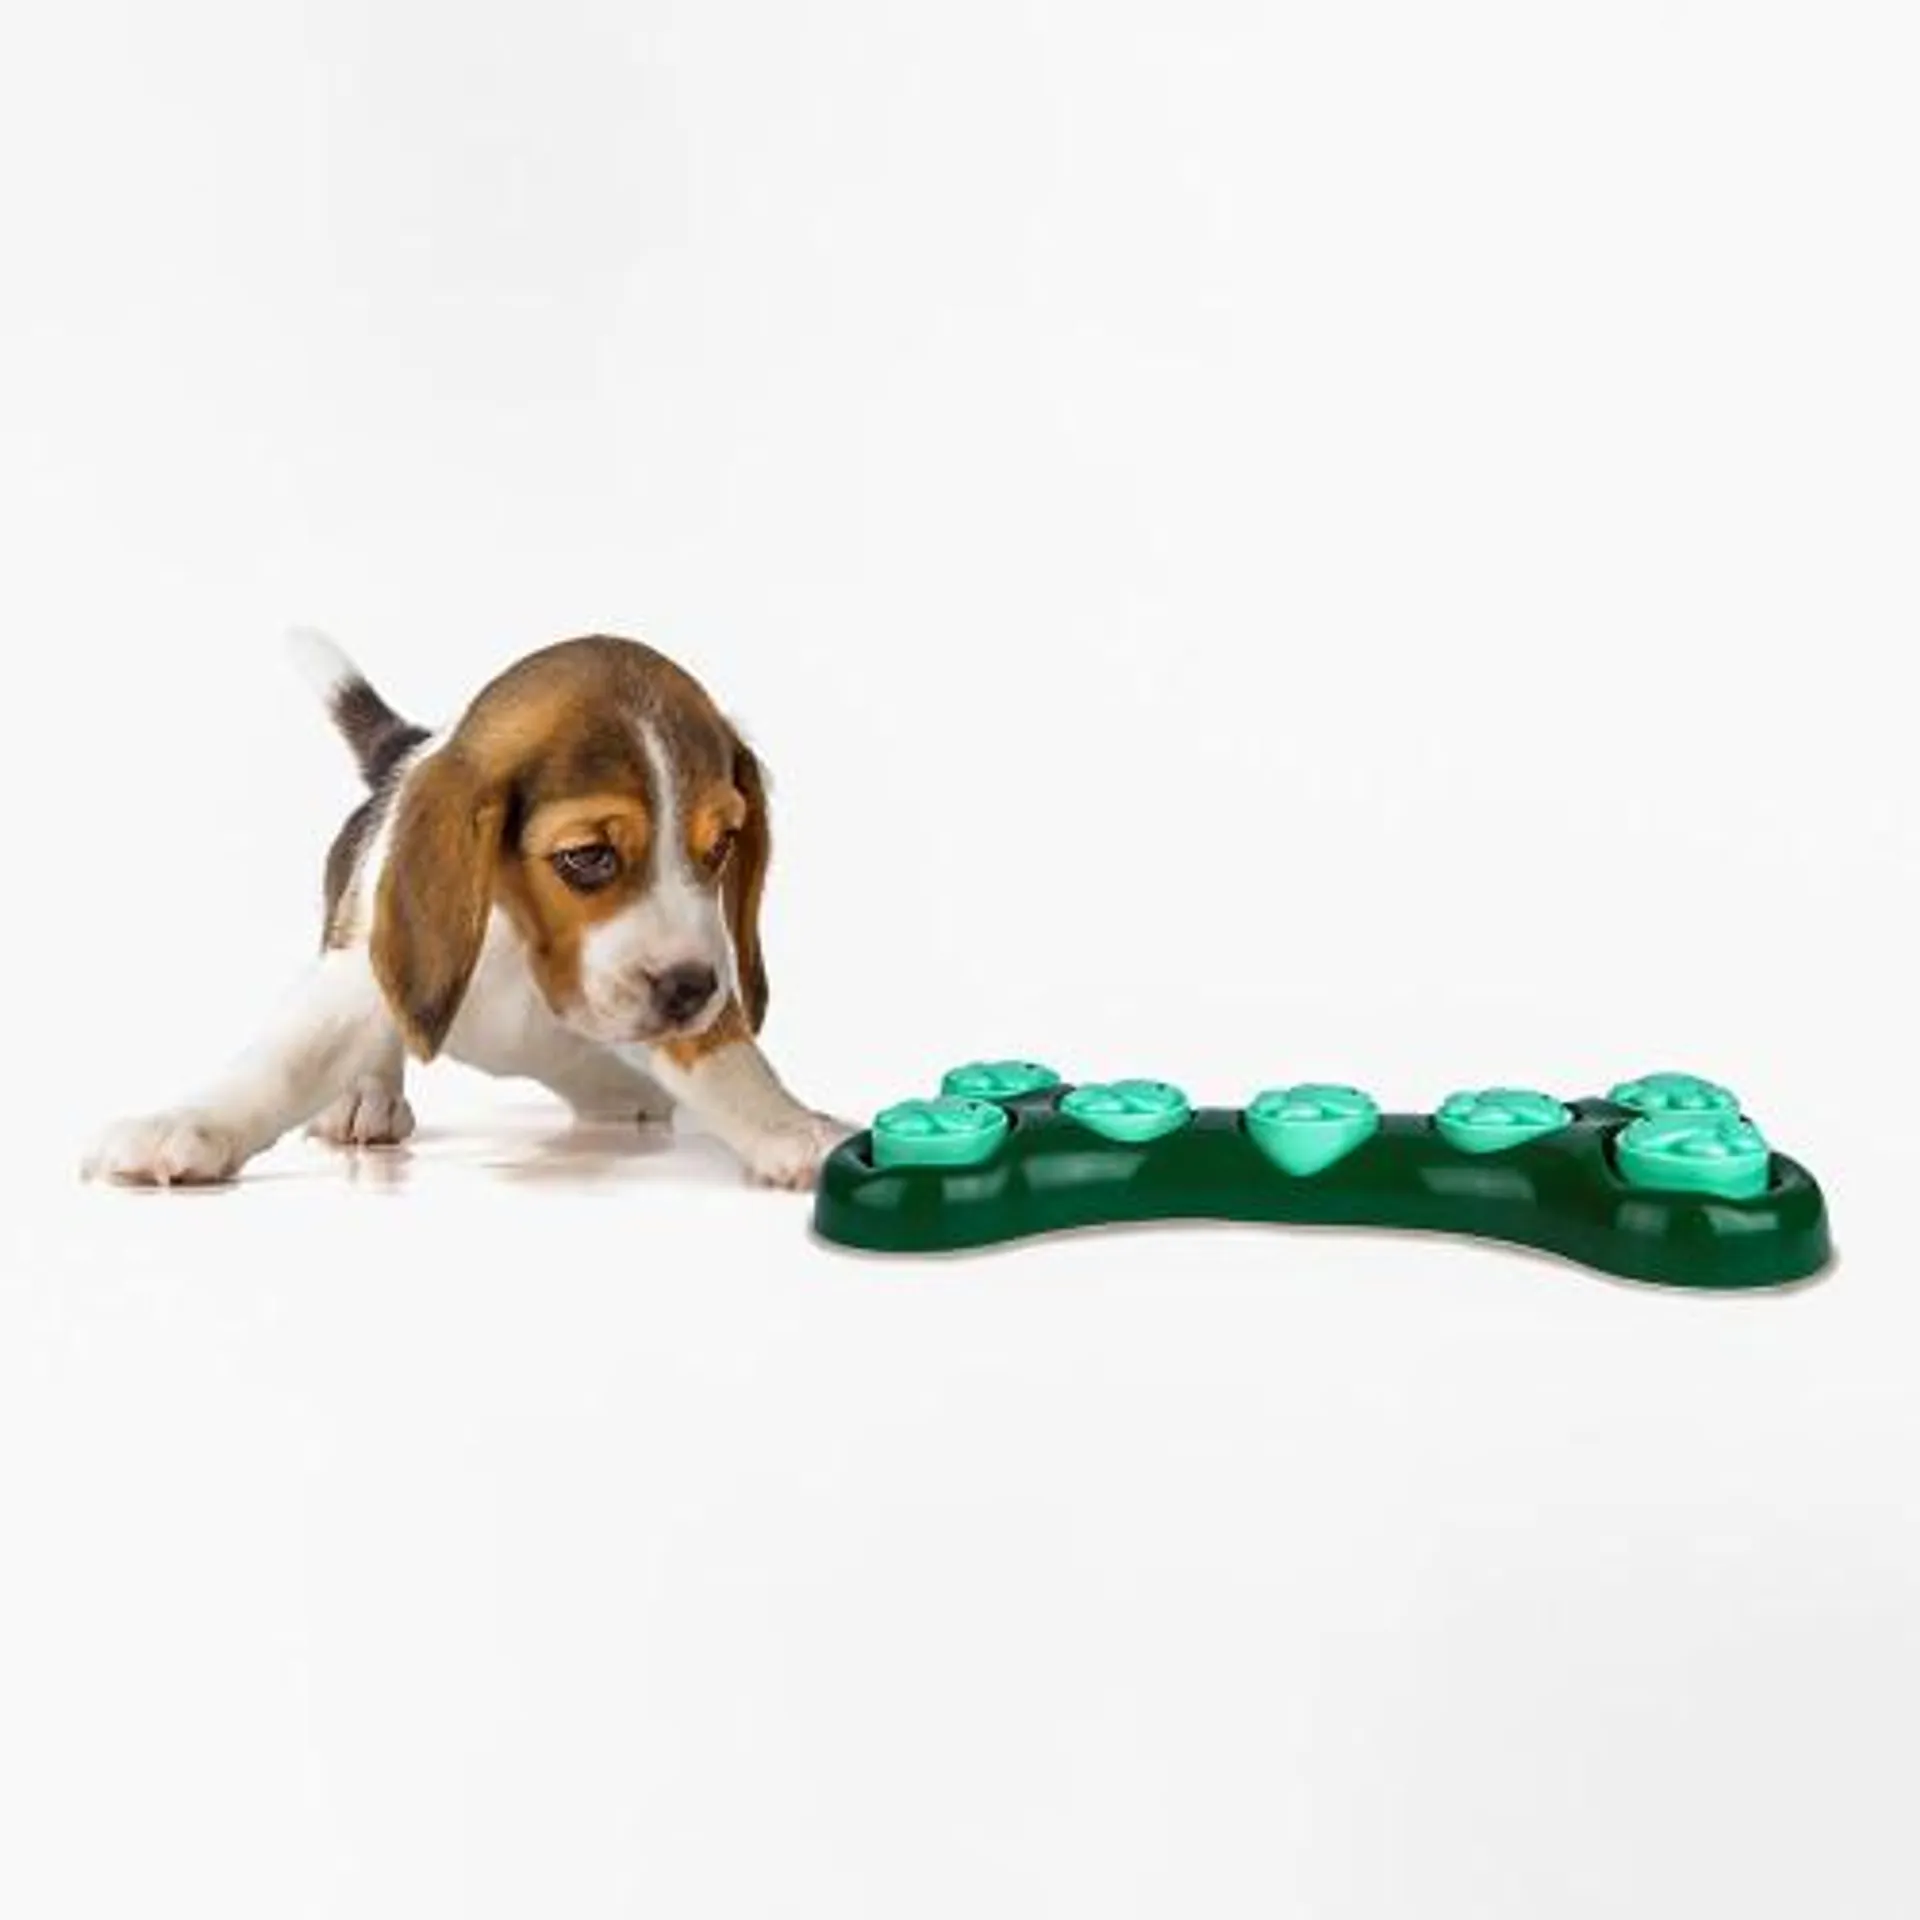 Bone Shape Treat Toy for Dogs by Crufts